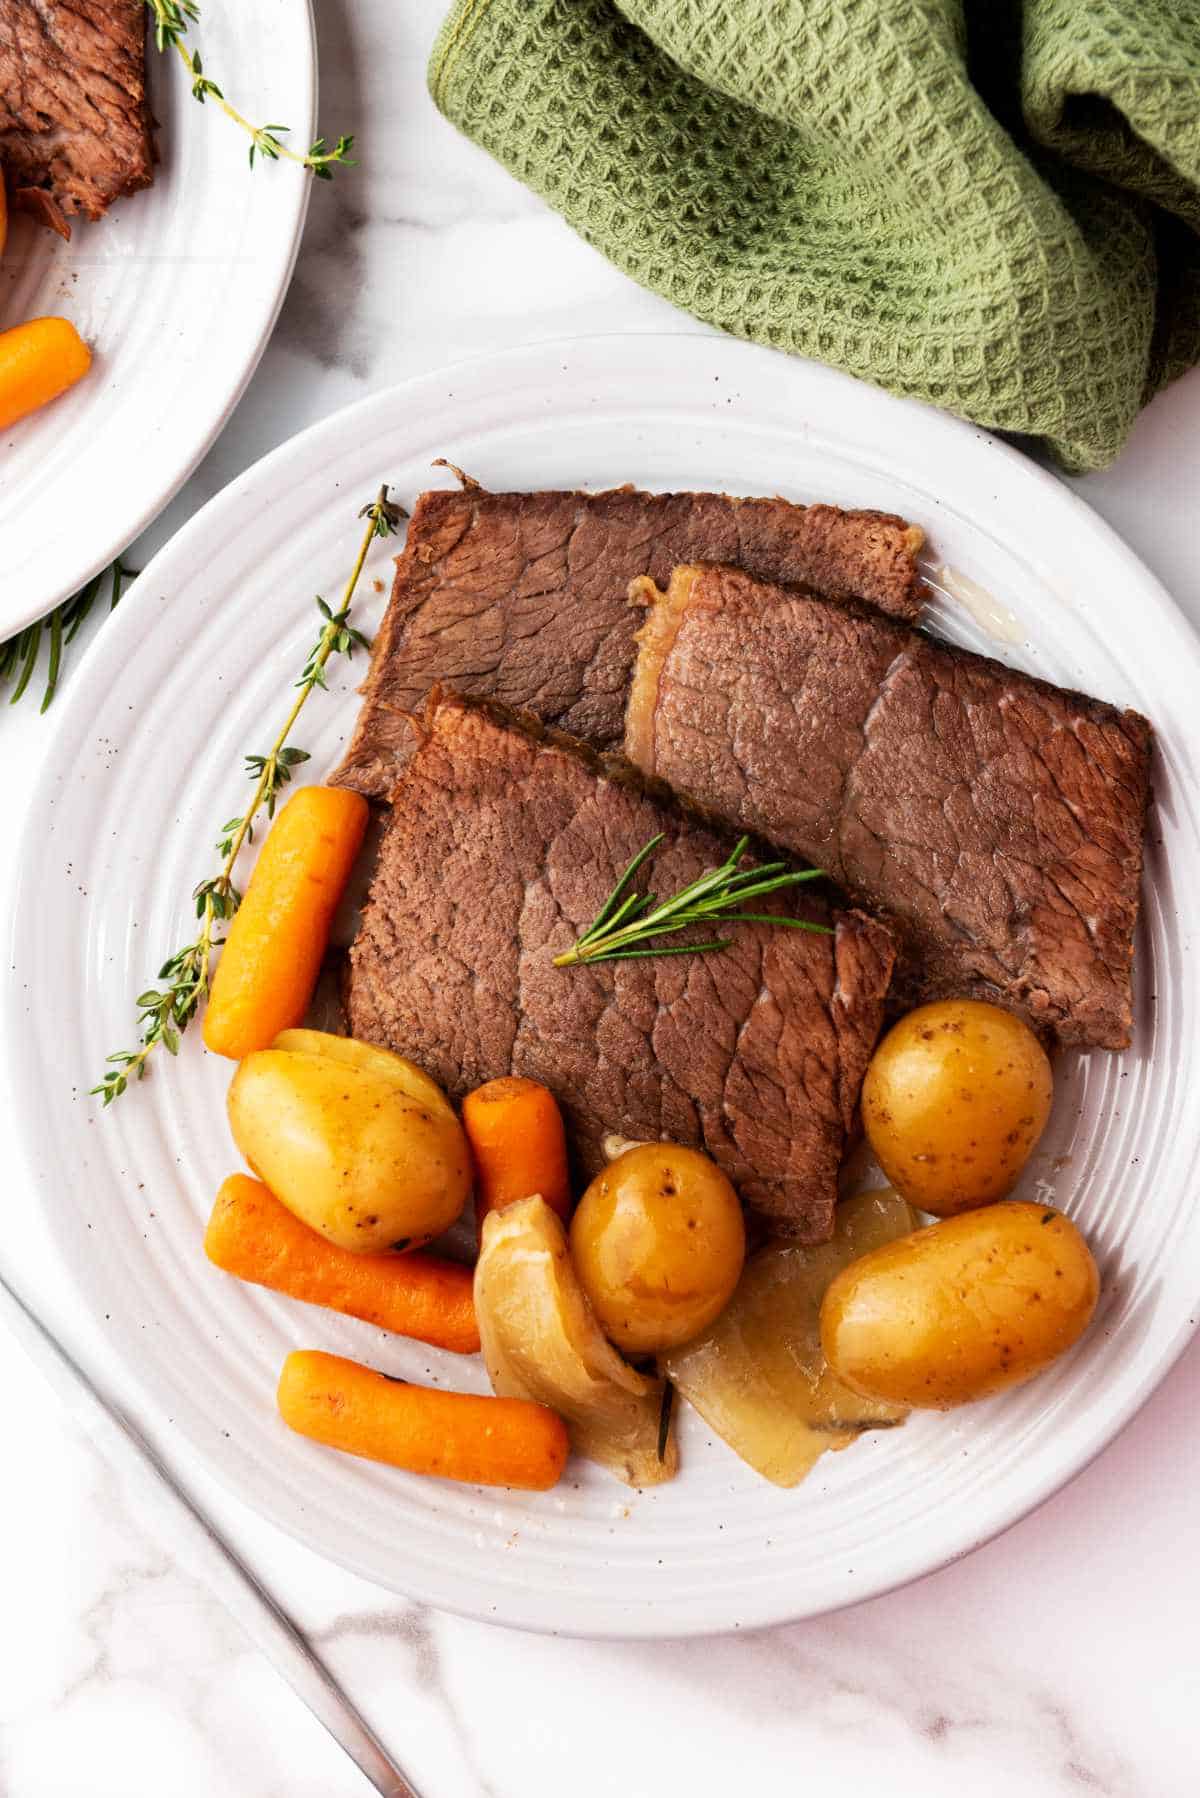 plate with slices of roast, potatoes, and carrots.